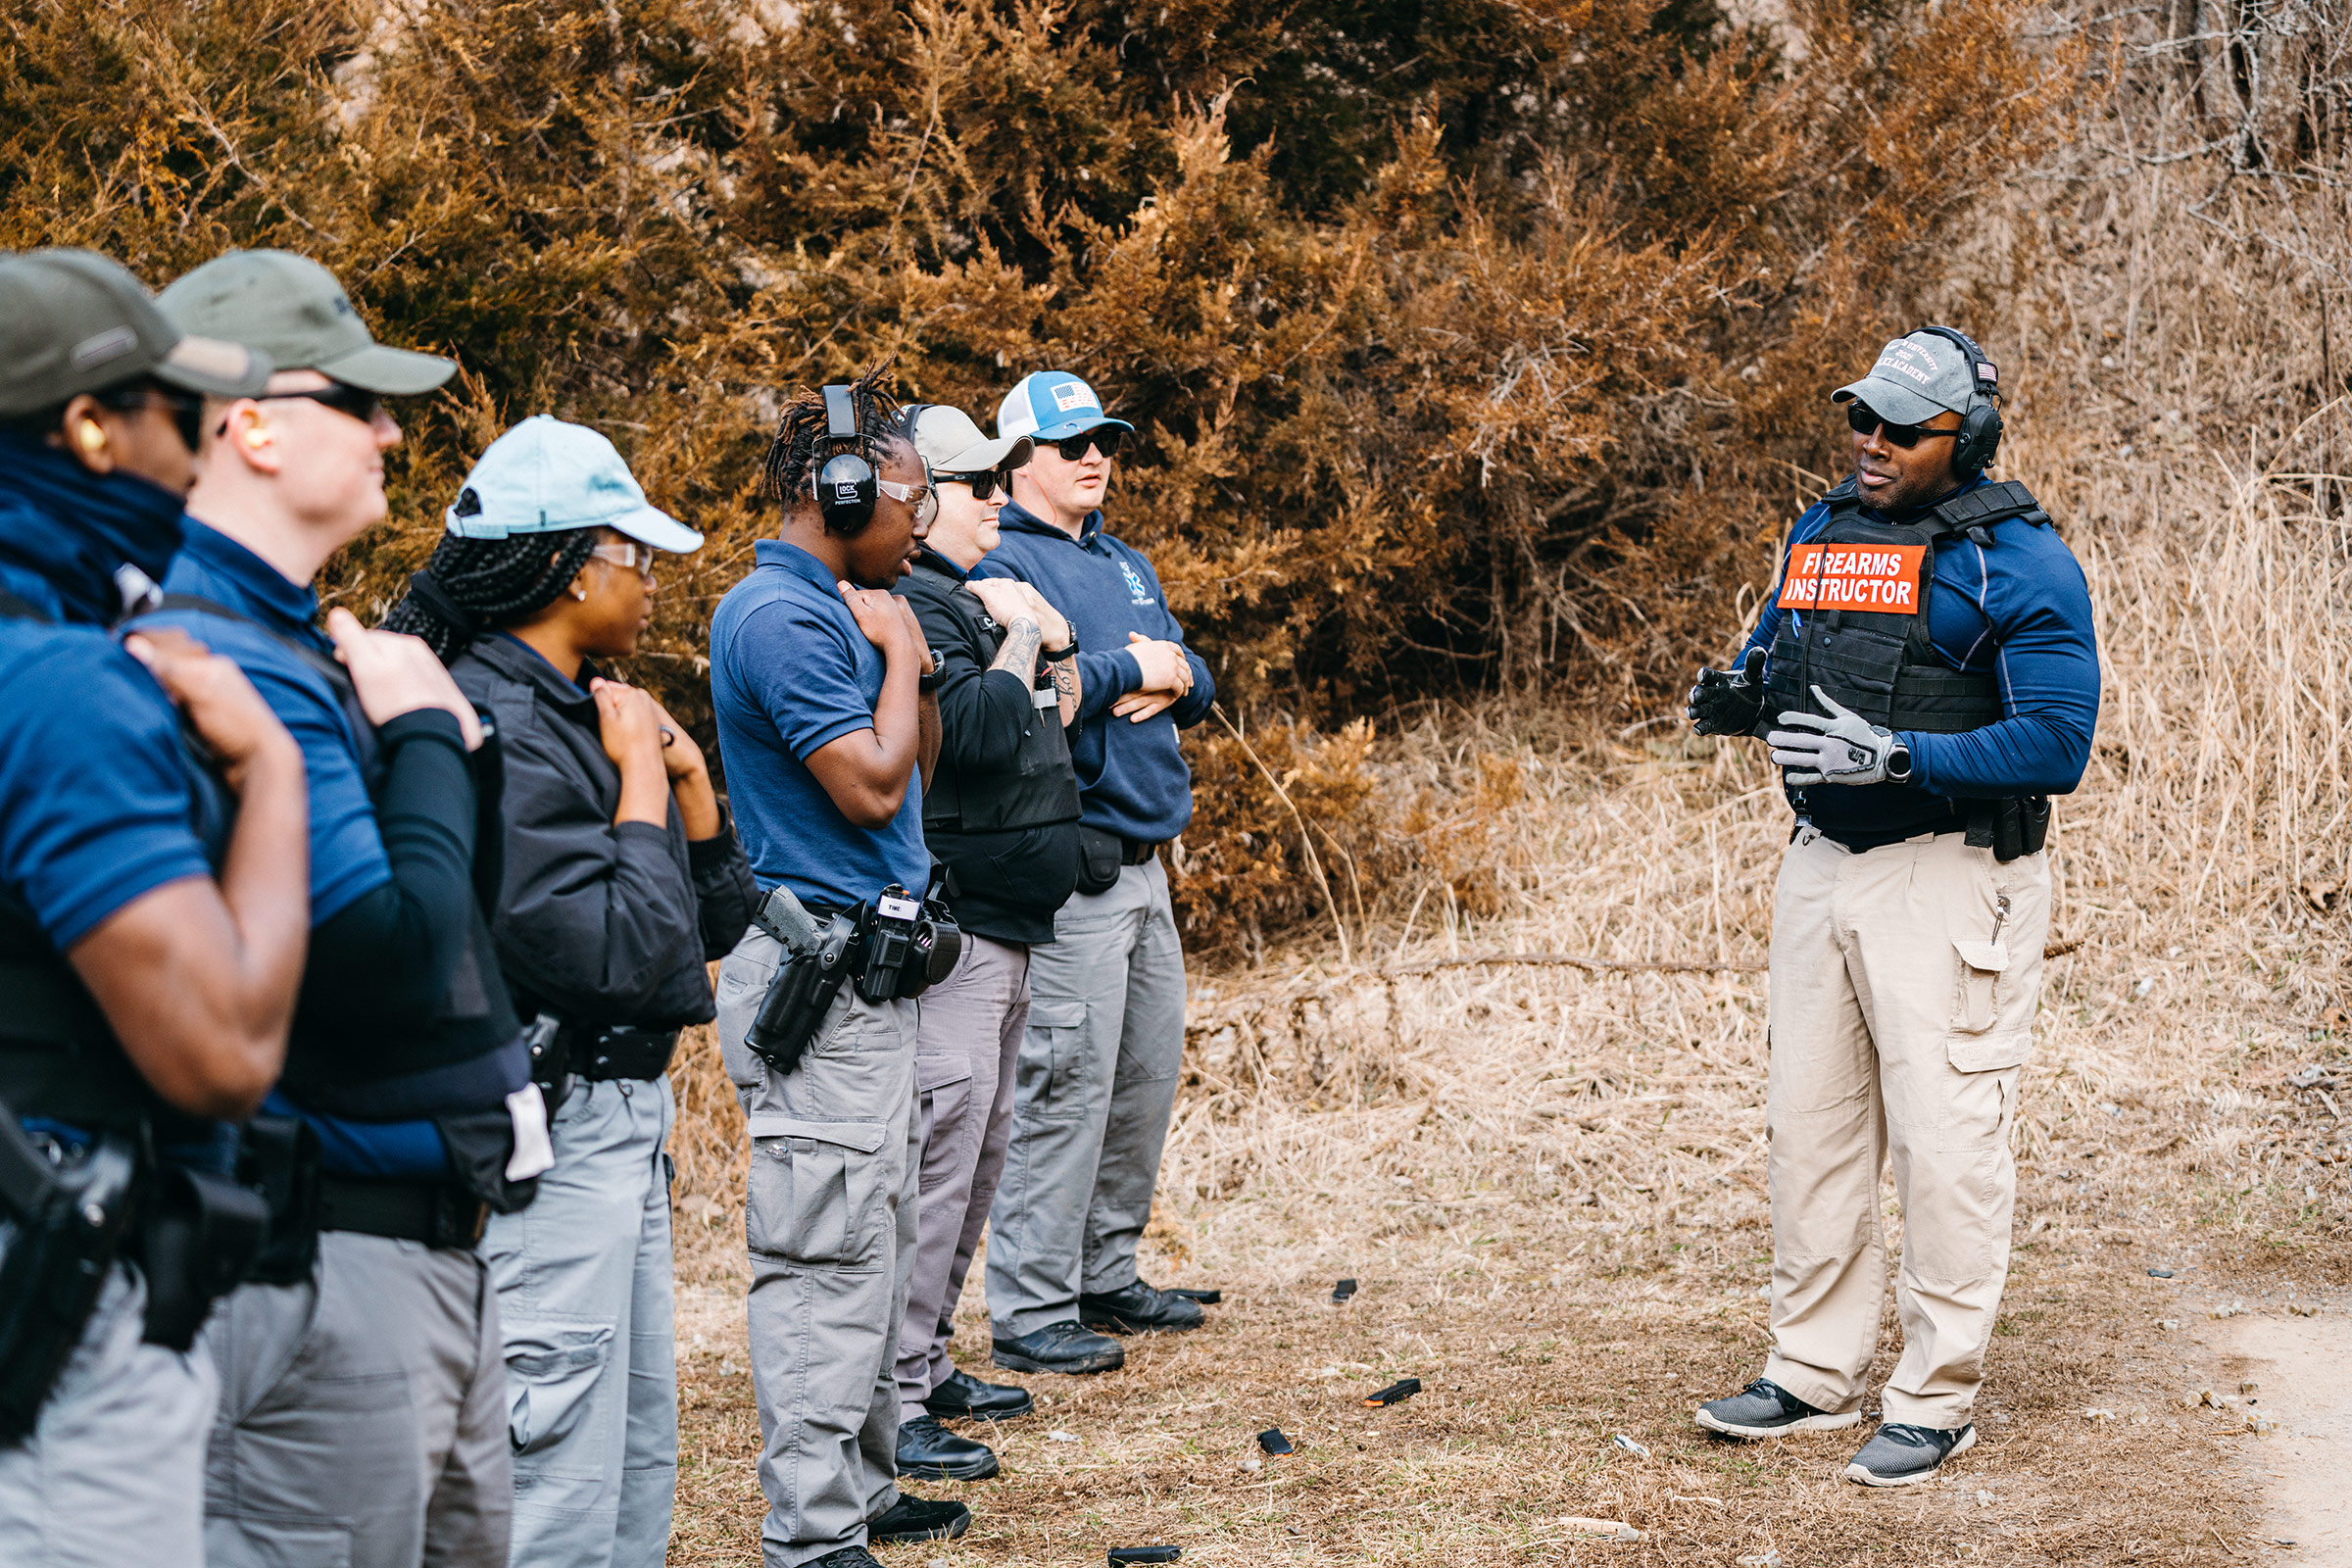 Lincoln University police chief Gary Hill prepares recruits for firearms training at a shooting range in Missouri on March 6 (Joe Martinez for TIME)